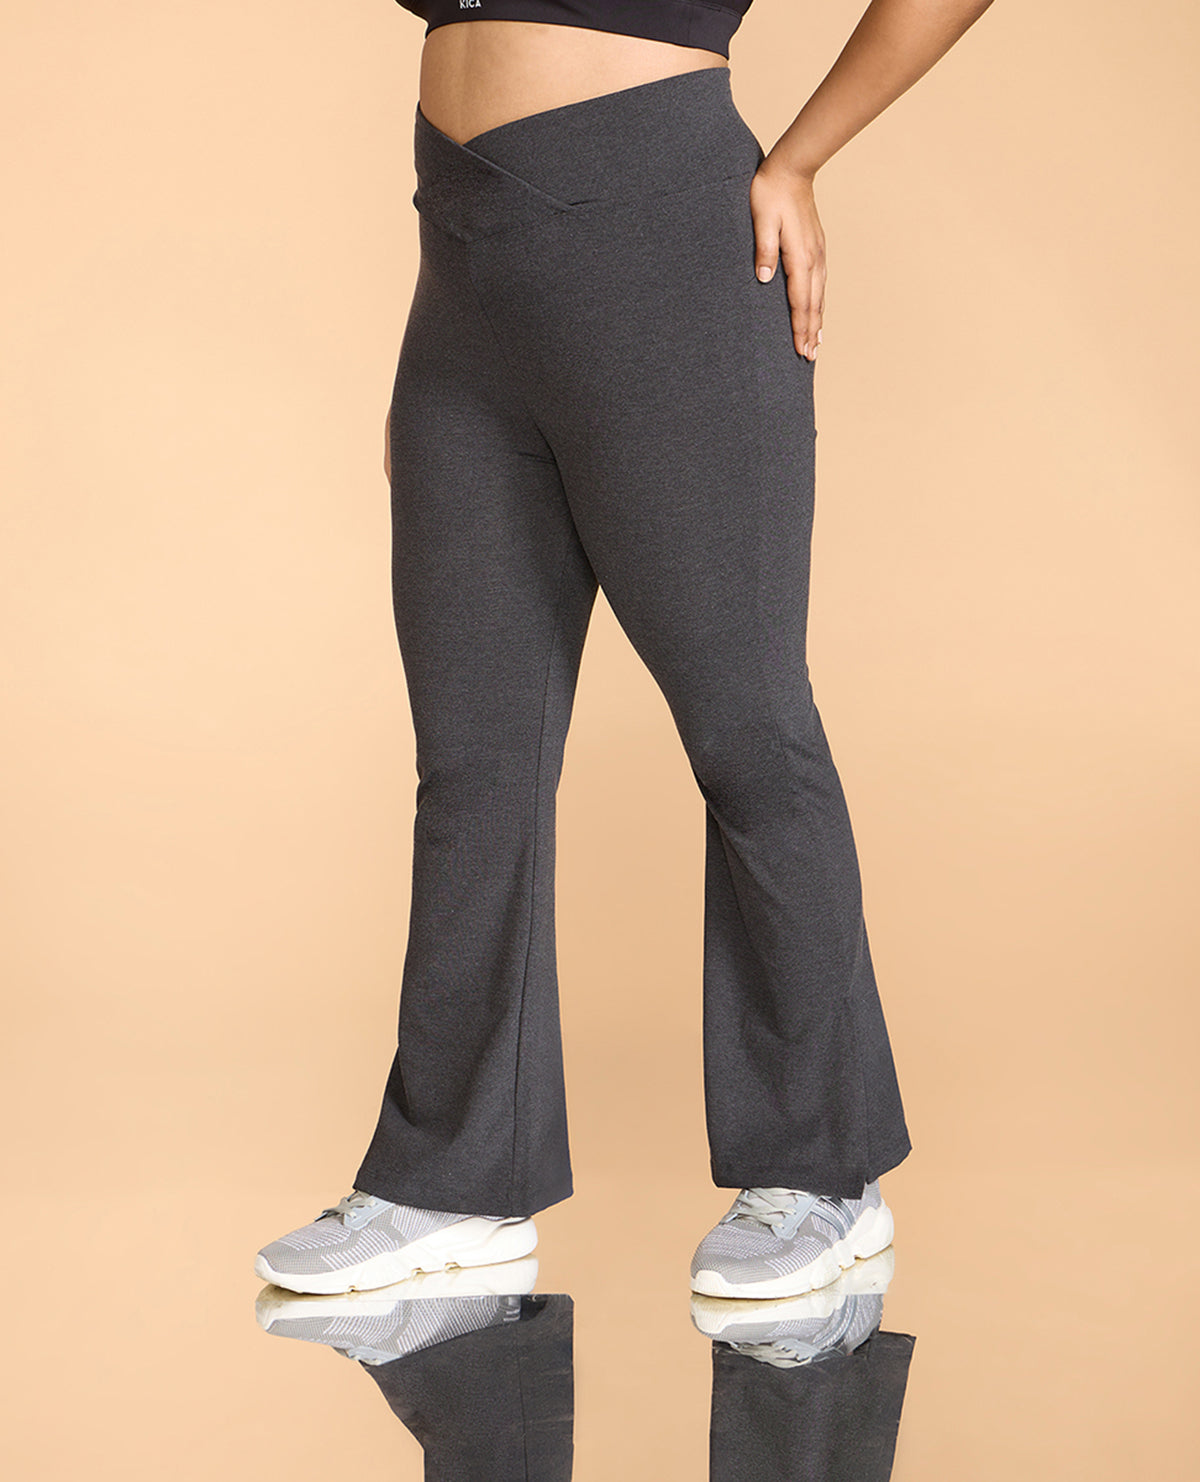 Women Cotton Stretchable Leggings with Pockets – Kica Active